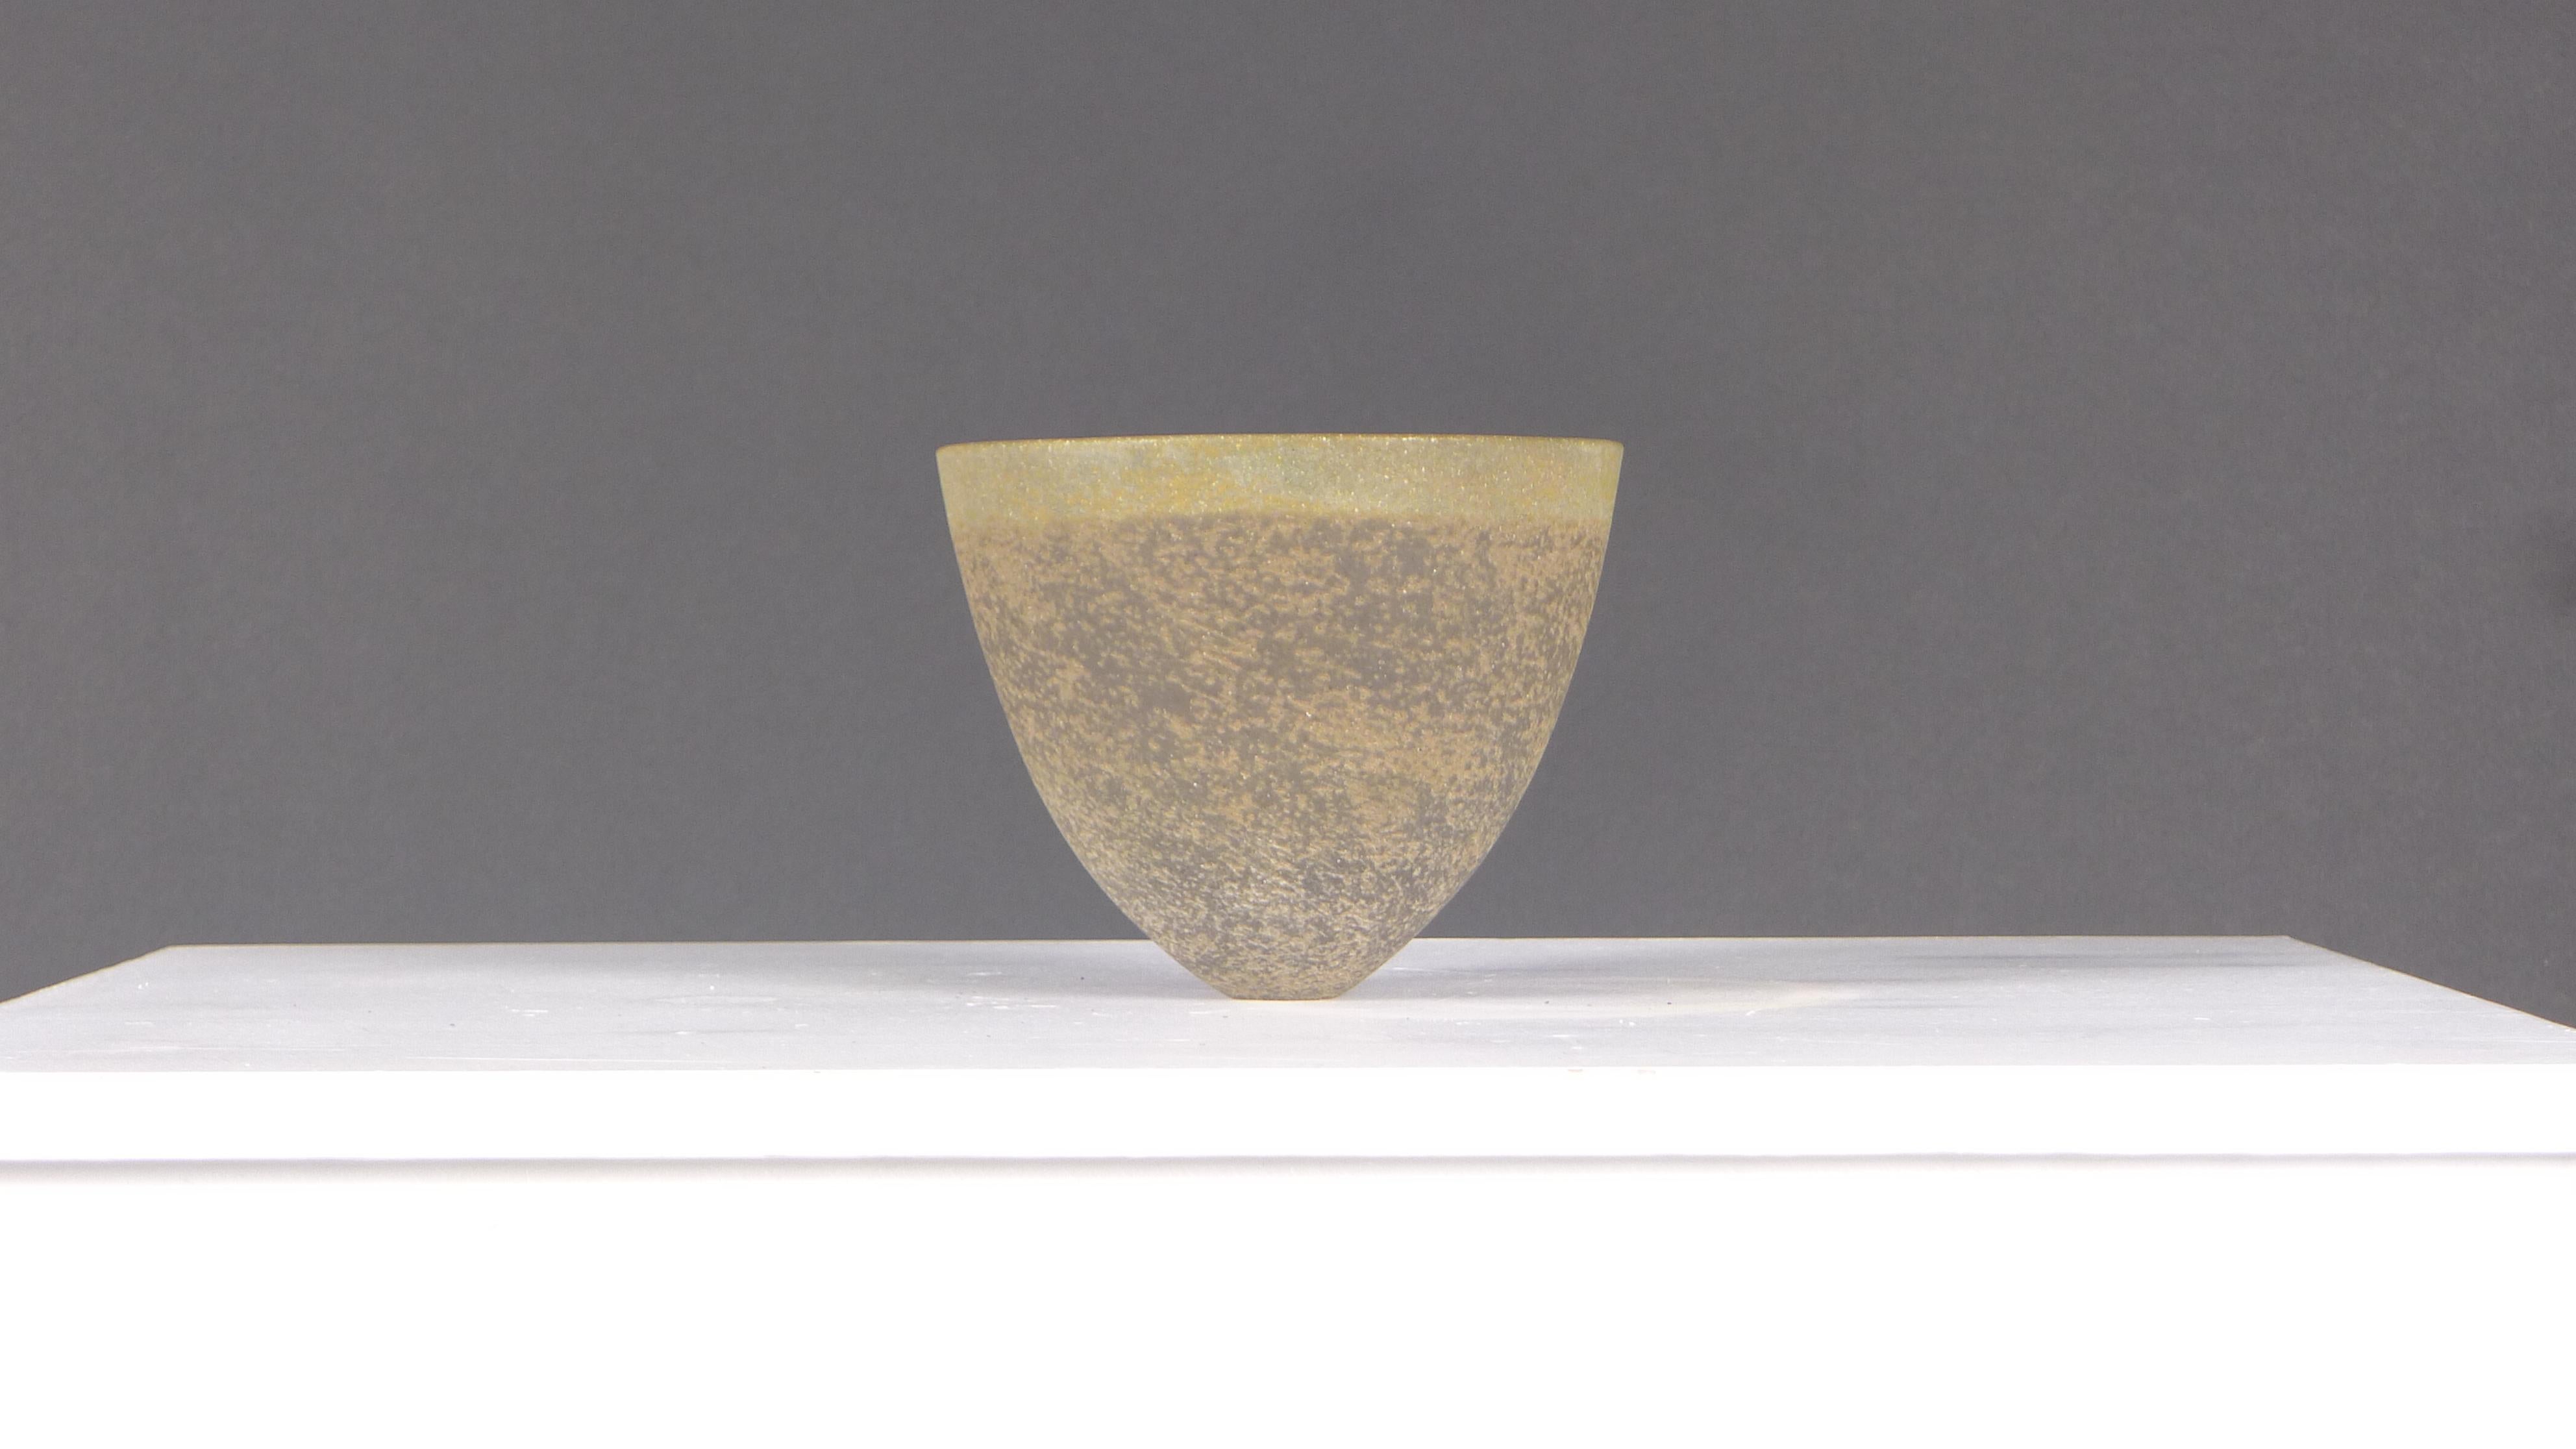 Stunning deep bowl by Jennifer Lee (British, born 1956).  

This hand-built coloured stoneware bowl with oxide burnished on the surface is entitled by the artist 'Dark with Amber Rim', reference JL158, and was created in 1989.

Soon after its